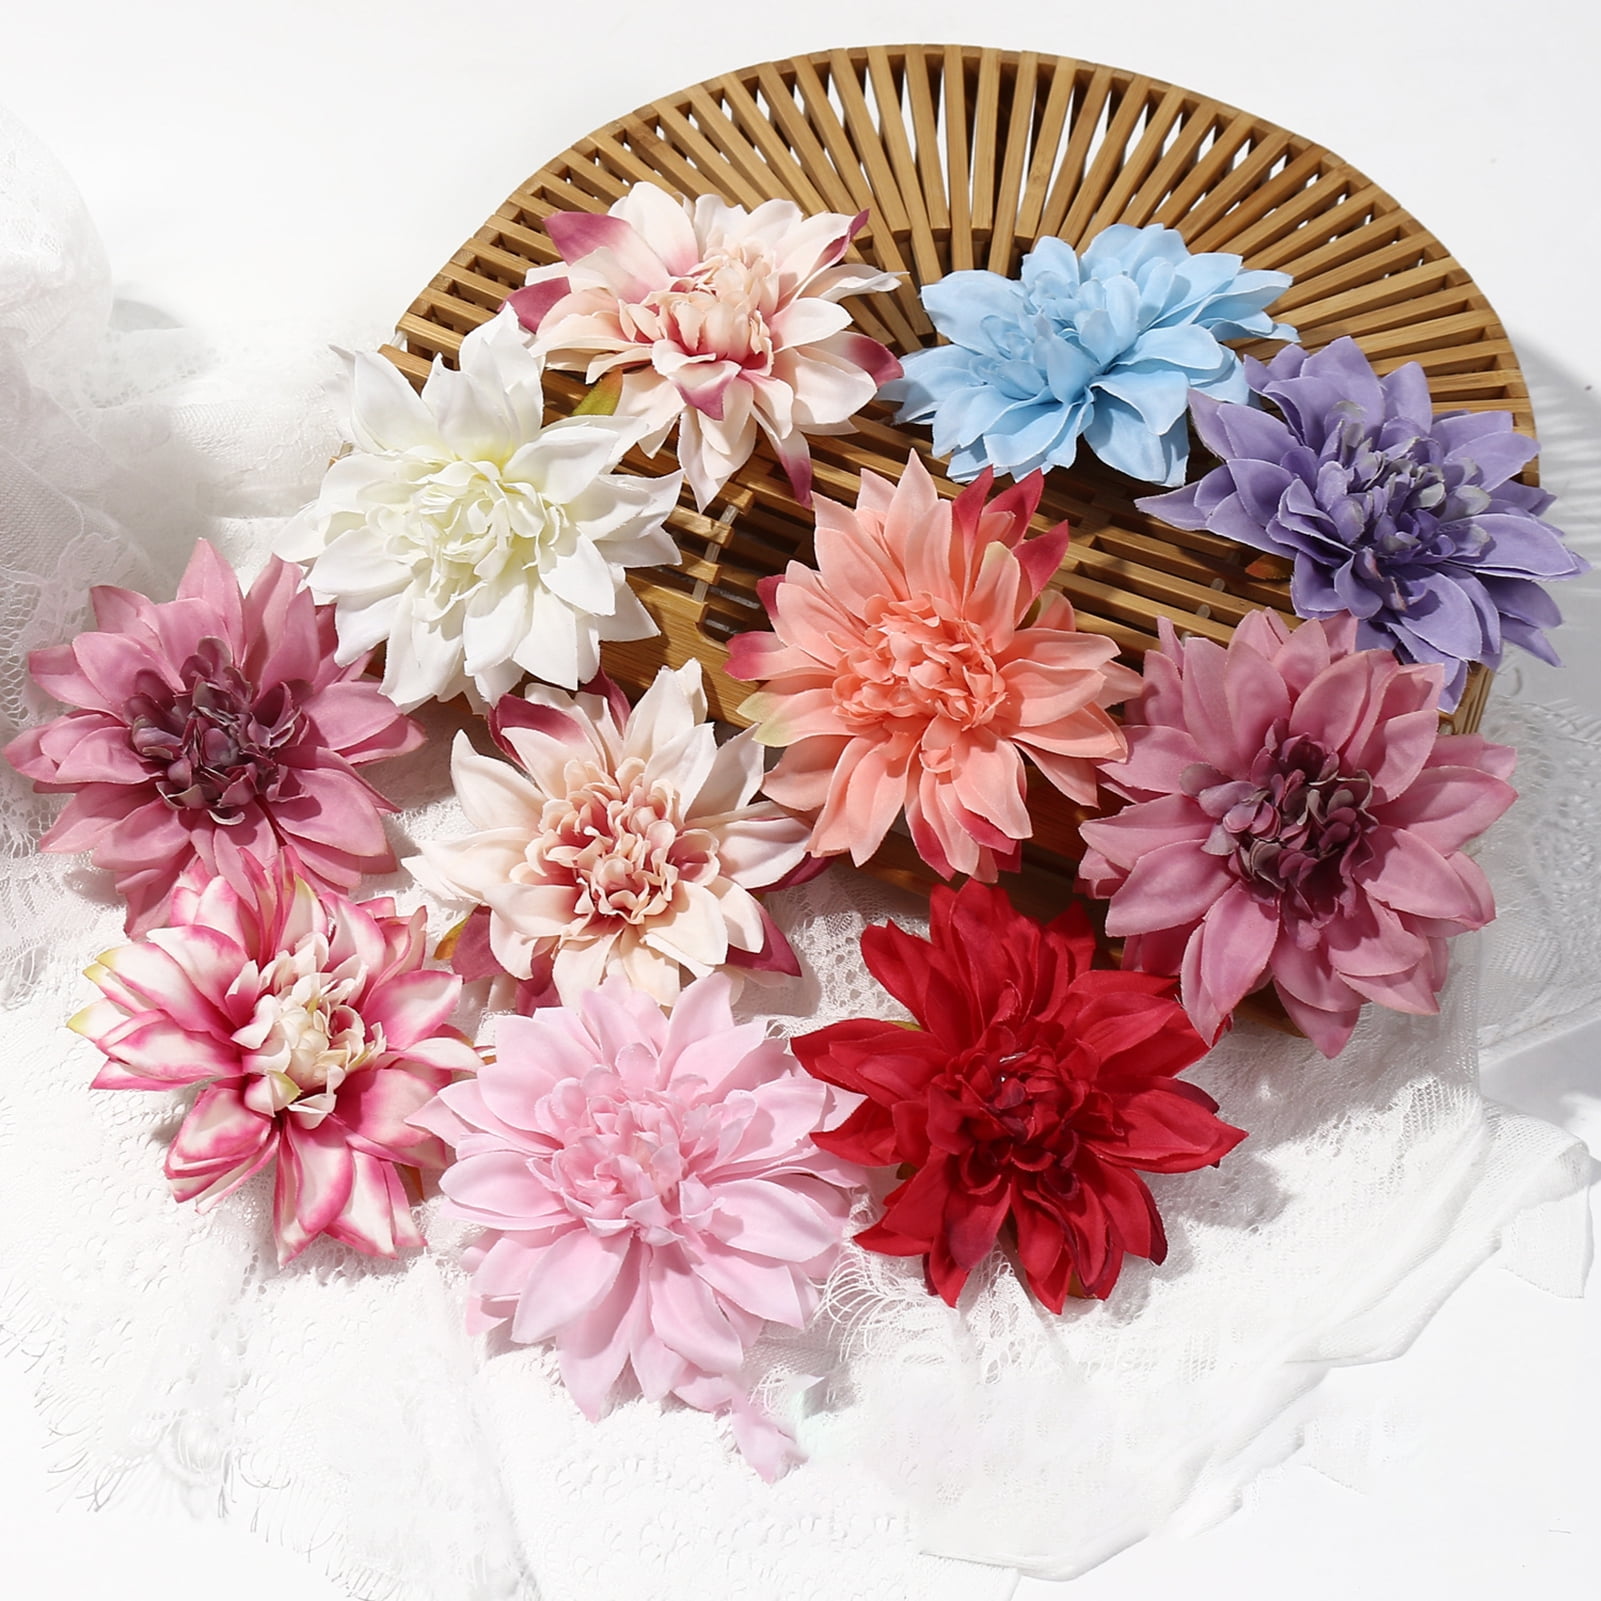 30Pcs Small Artificial Flowers Head Exquisite Handmade Wedding Floral Decoration